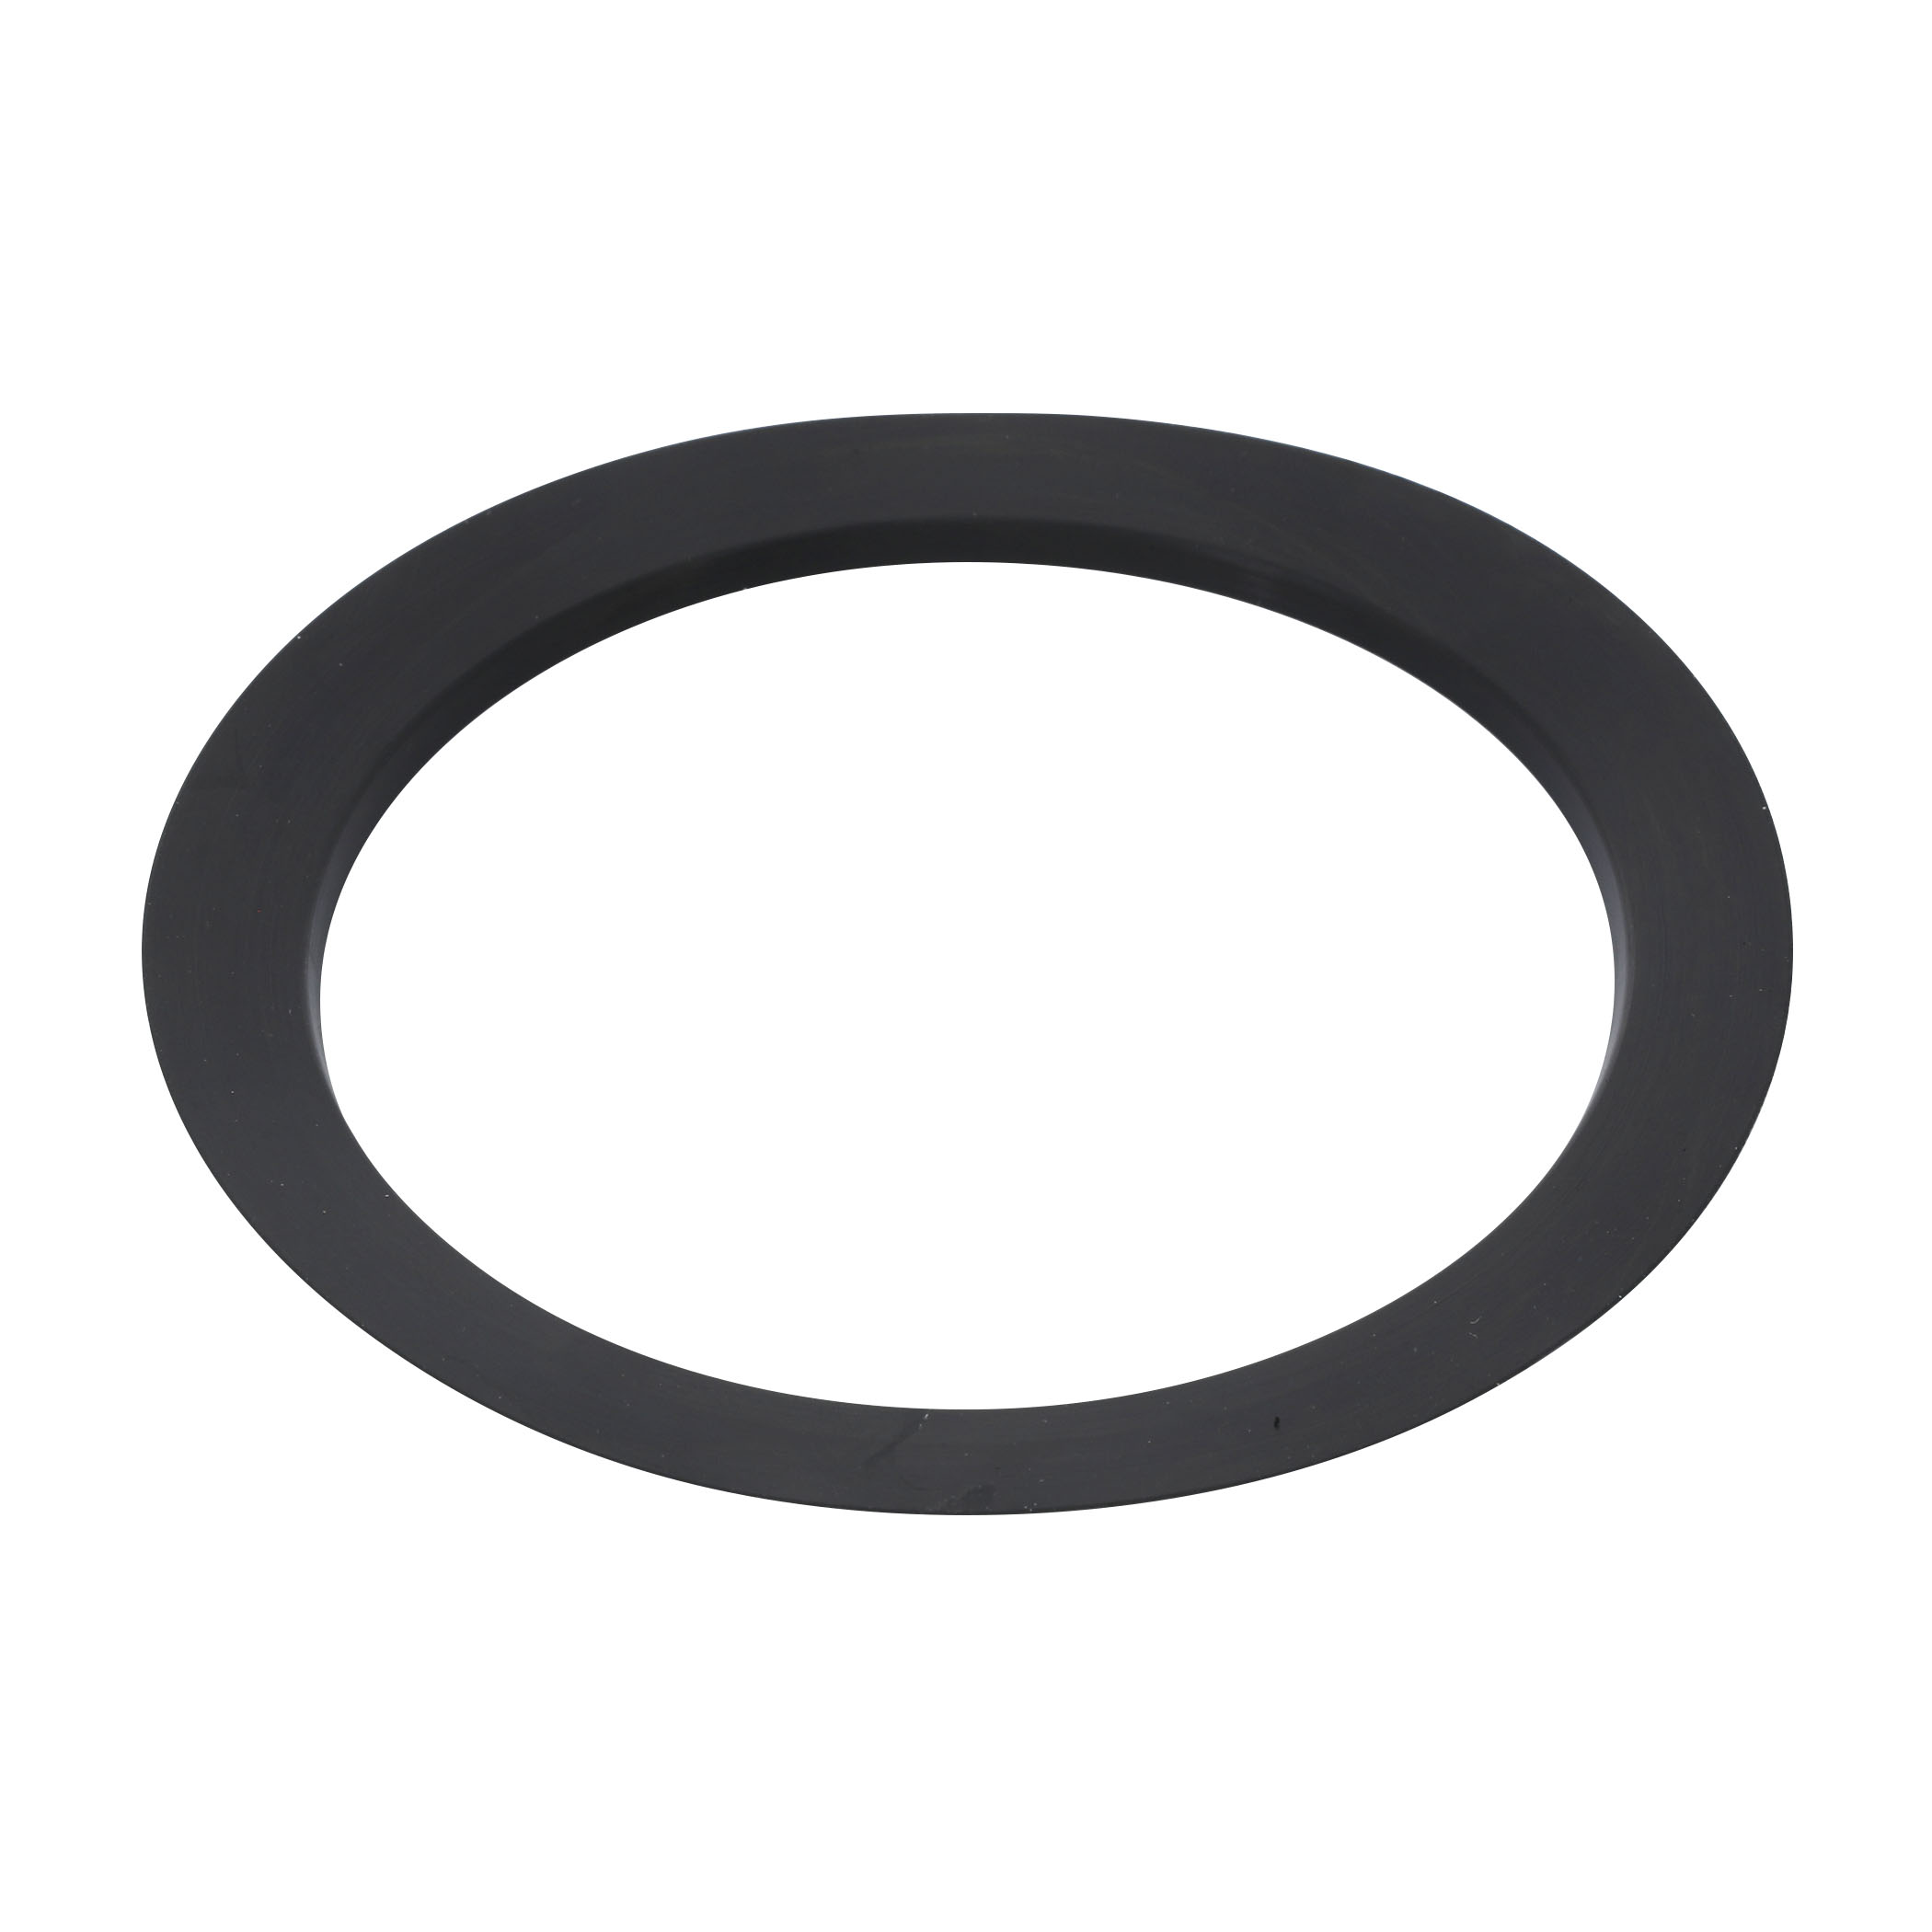 Rubber 3-3/8 in. x 4-1/4 in. Replacement Gasket